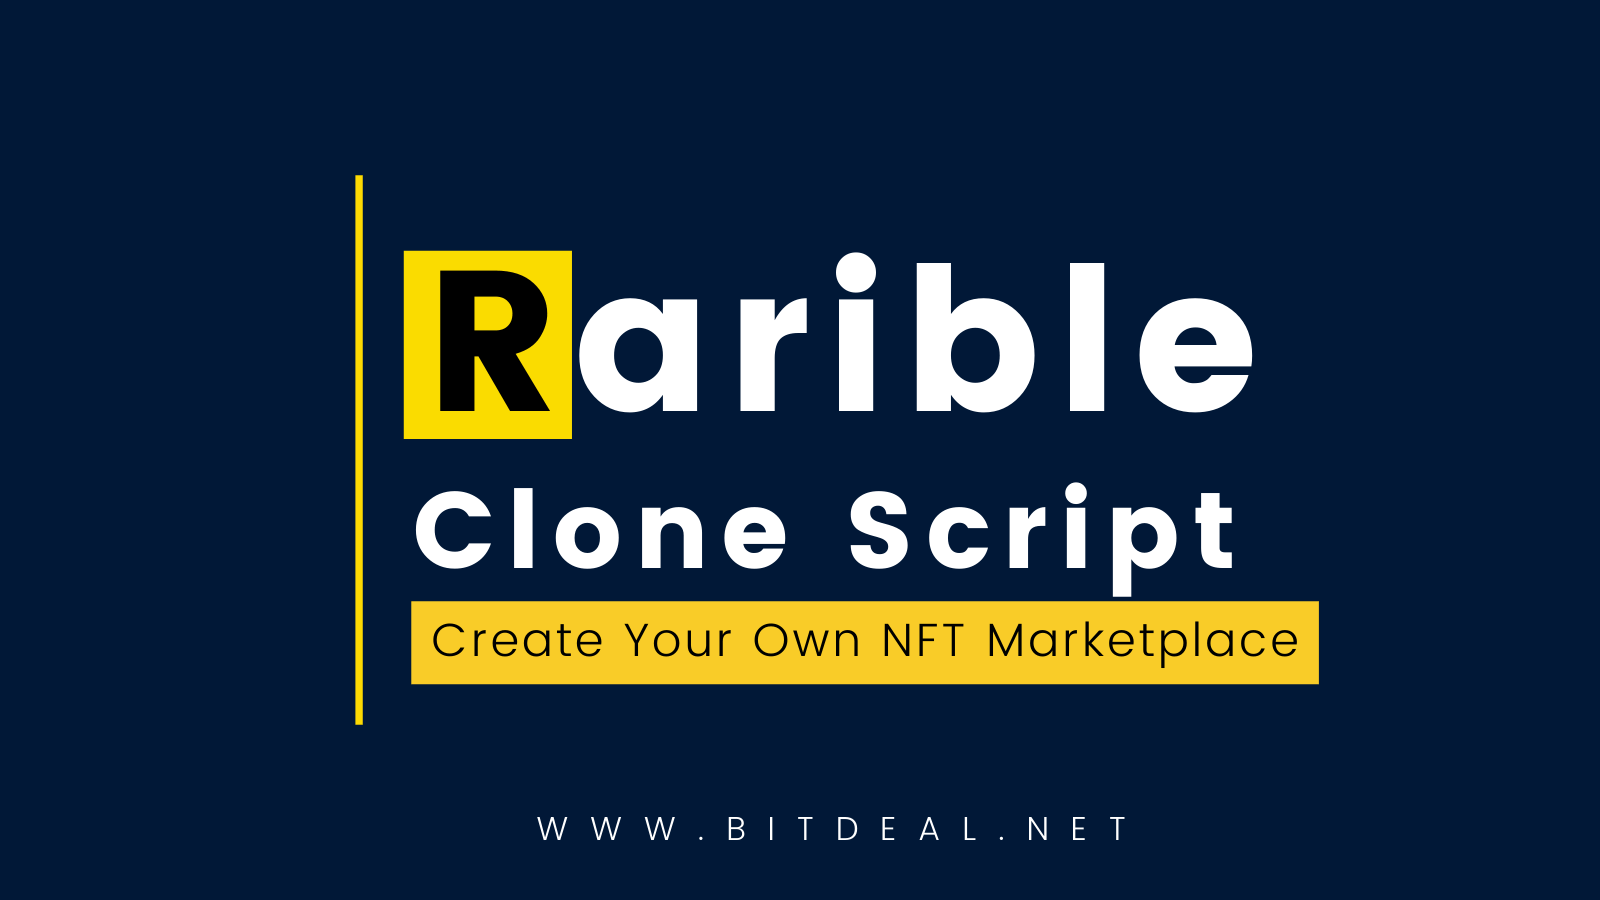 Article about What is Rarible Clone Script